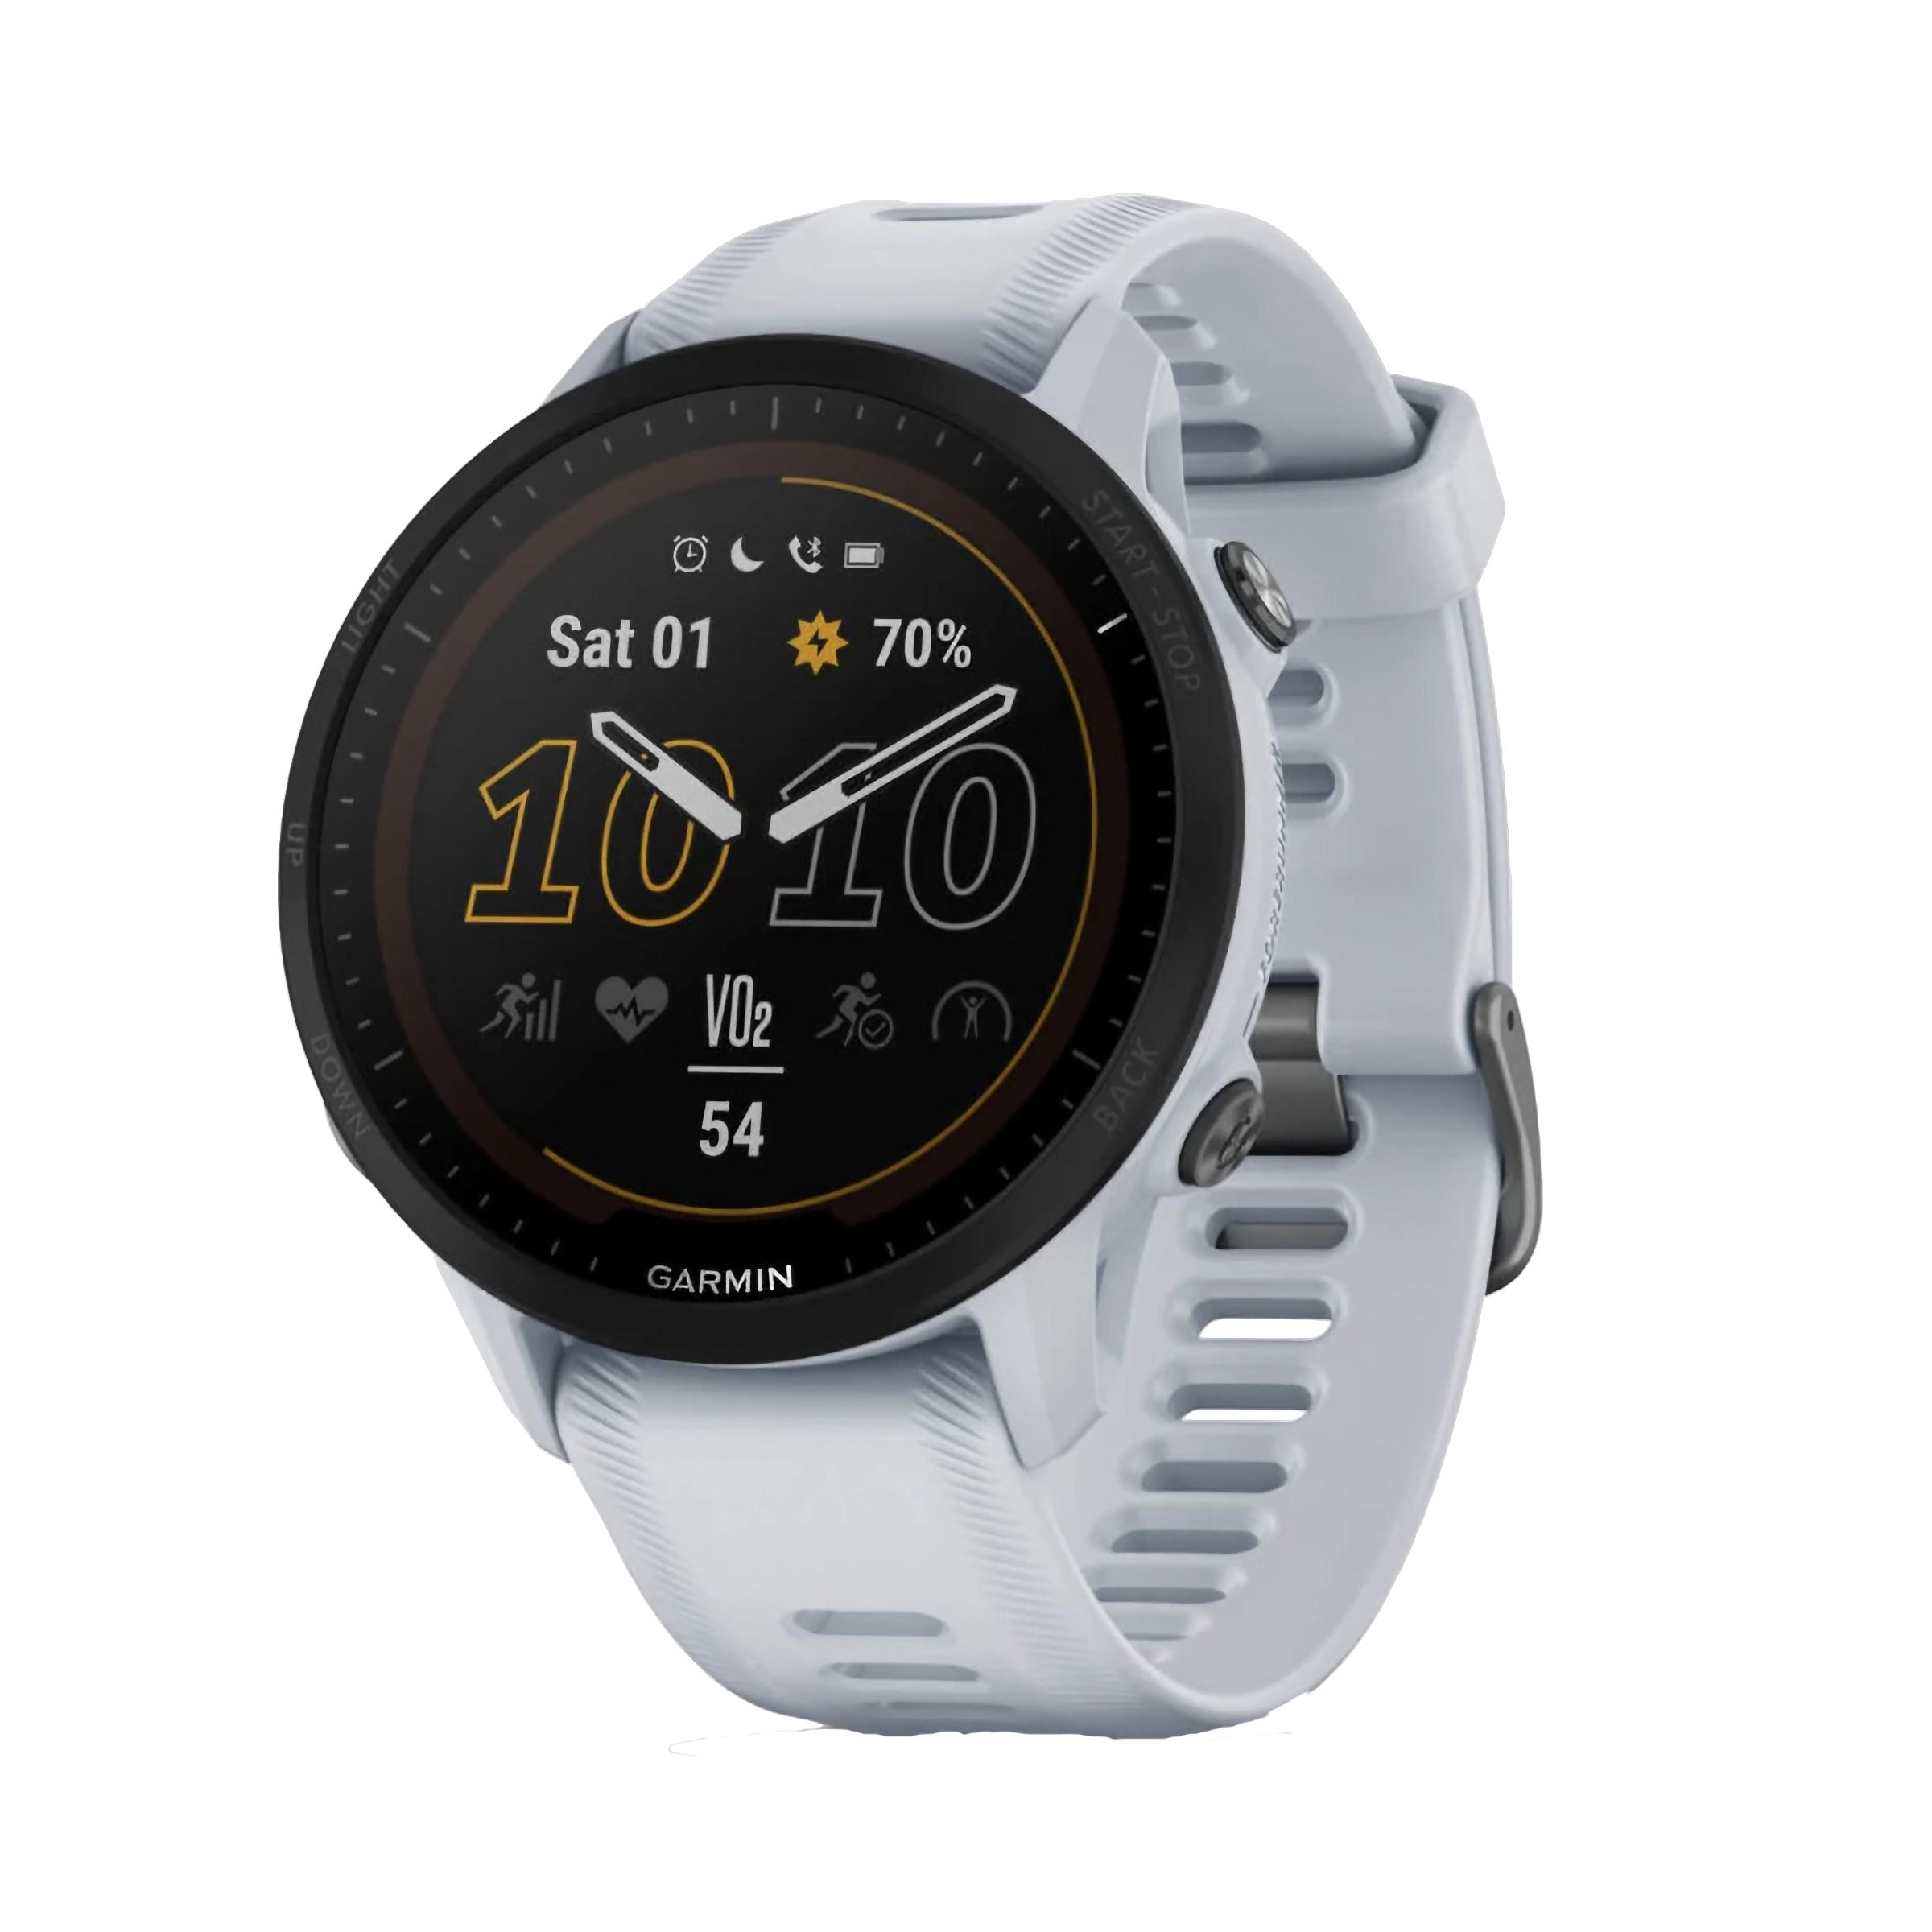 A round smartwatch with an off-white body and band.